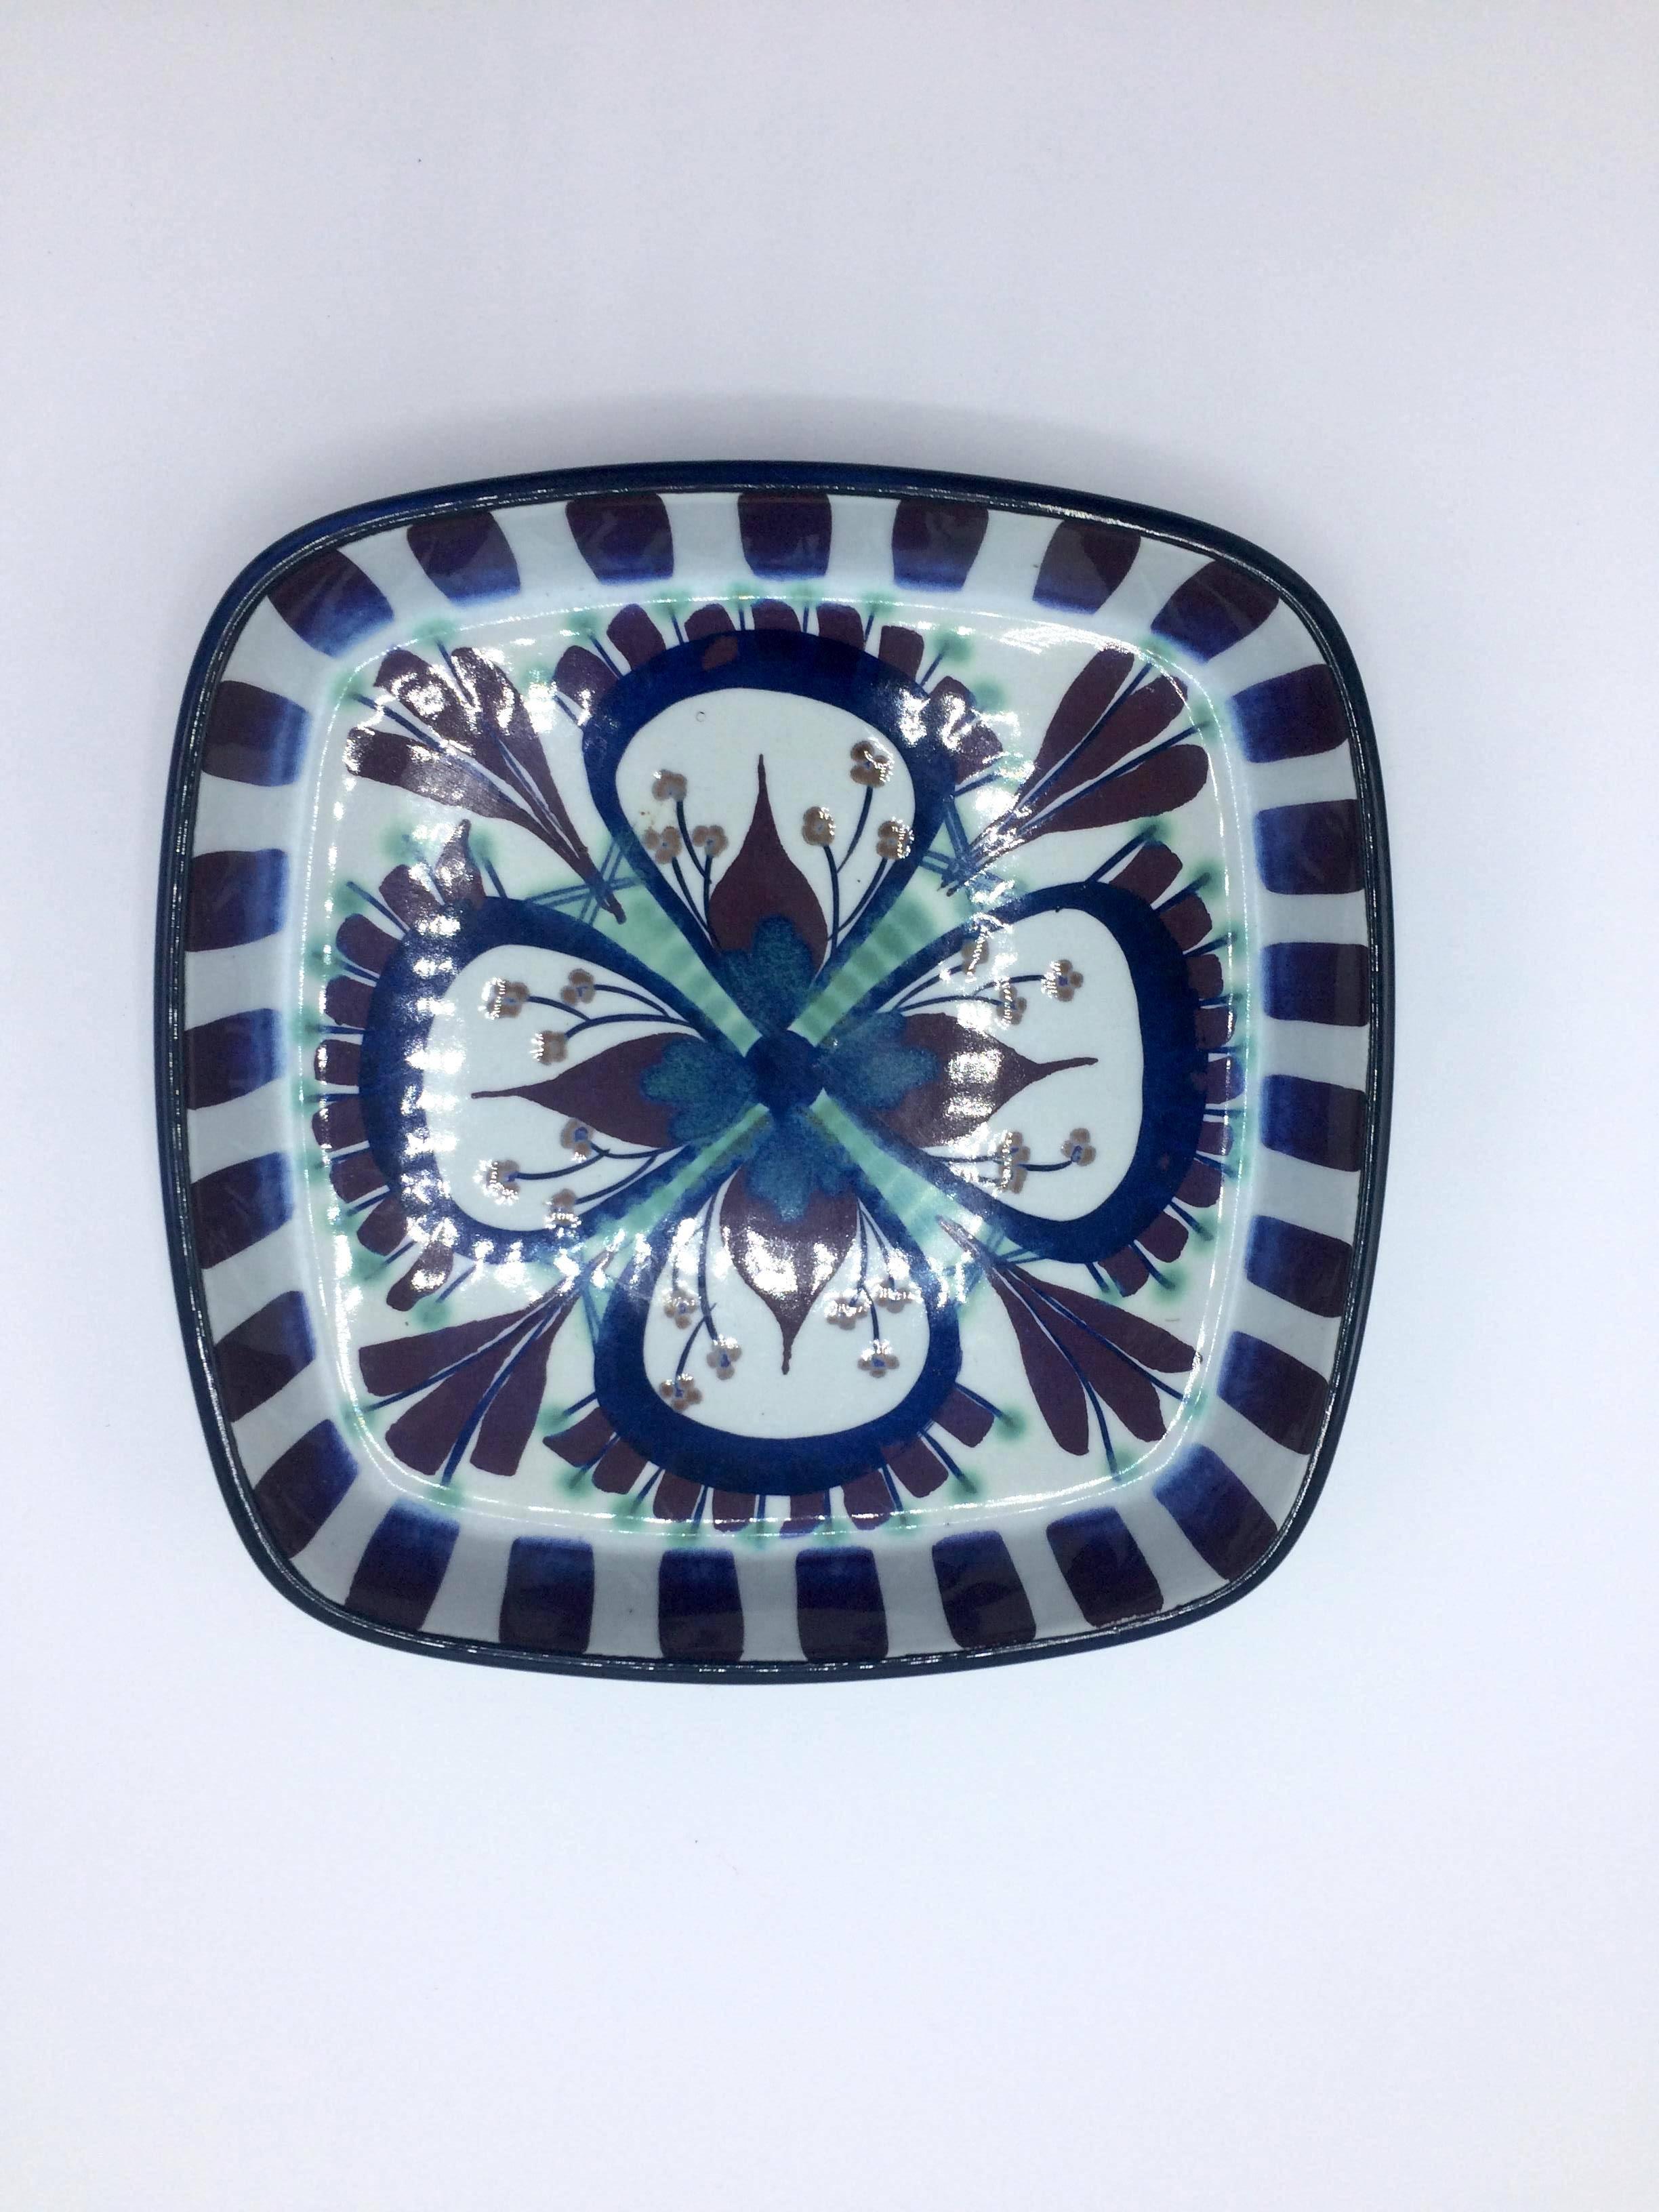 For your consideration,

we have this wonderful midcentury Tenera Fajance dish by Marianne Johnson for Royal Copenhagen, Denmark. It is clearly signed, numbered and marked by the Royal Copenhagen seal and is in superb condition.